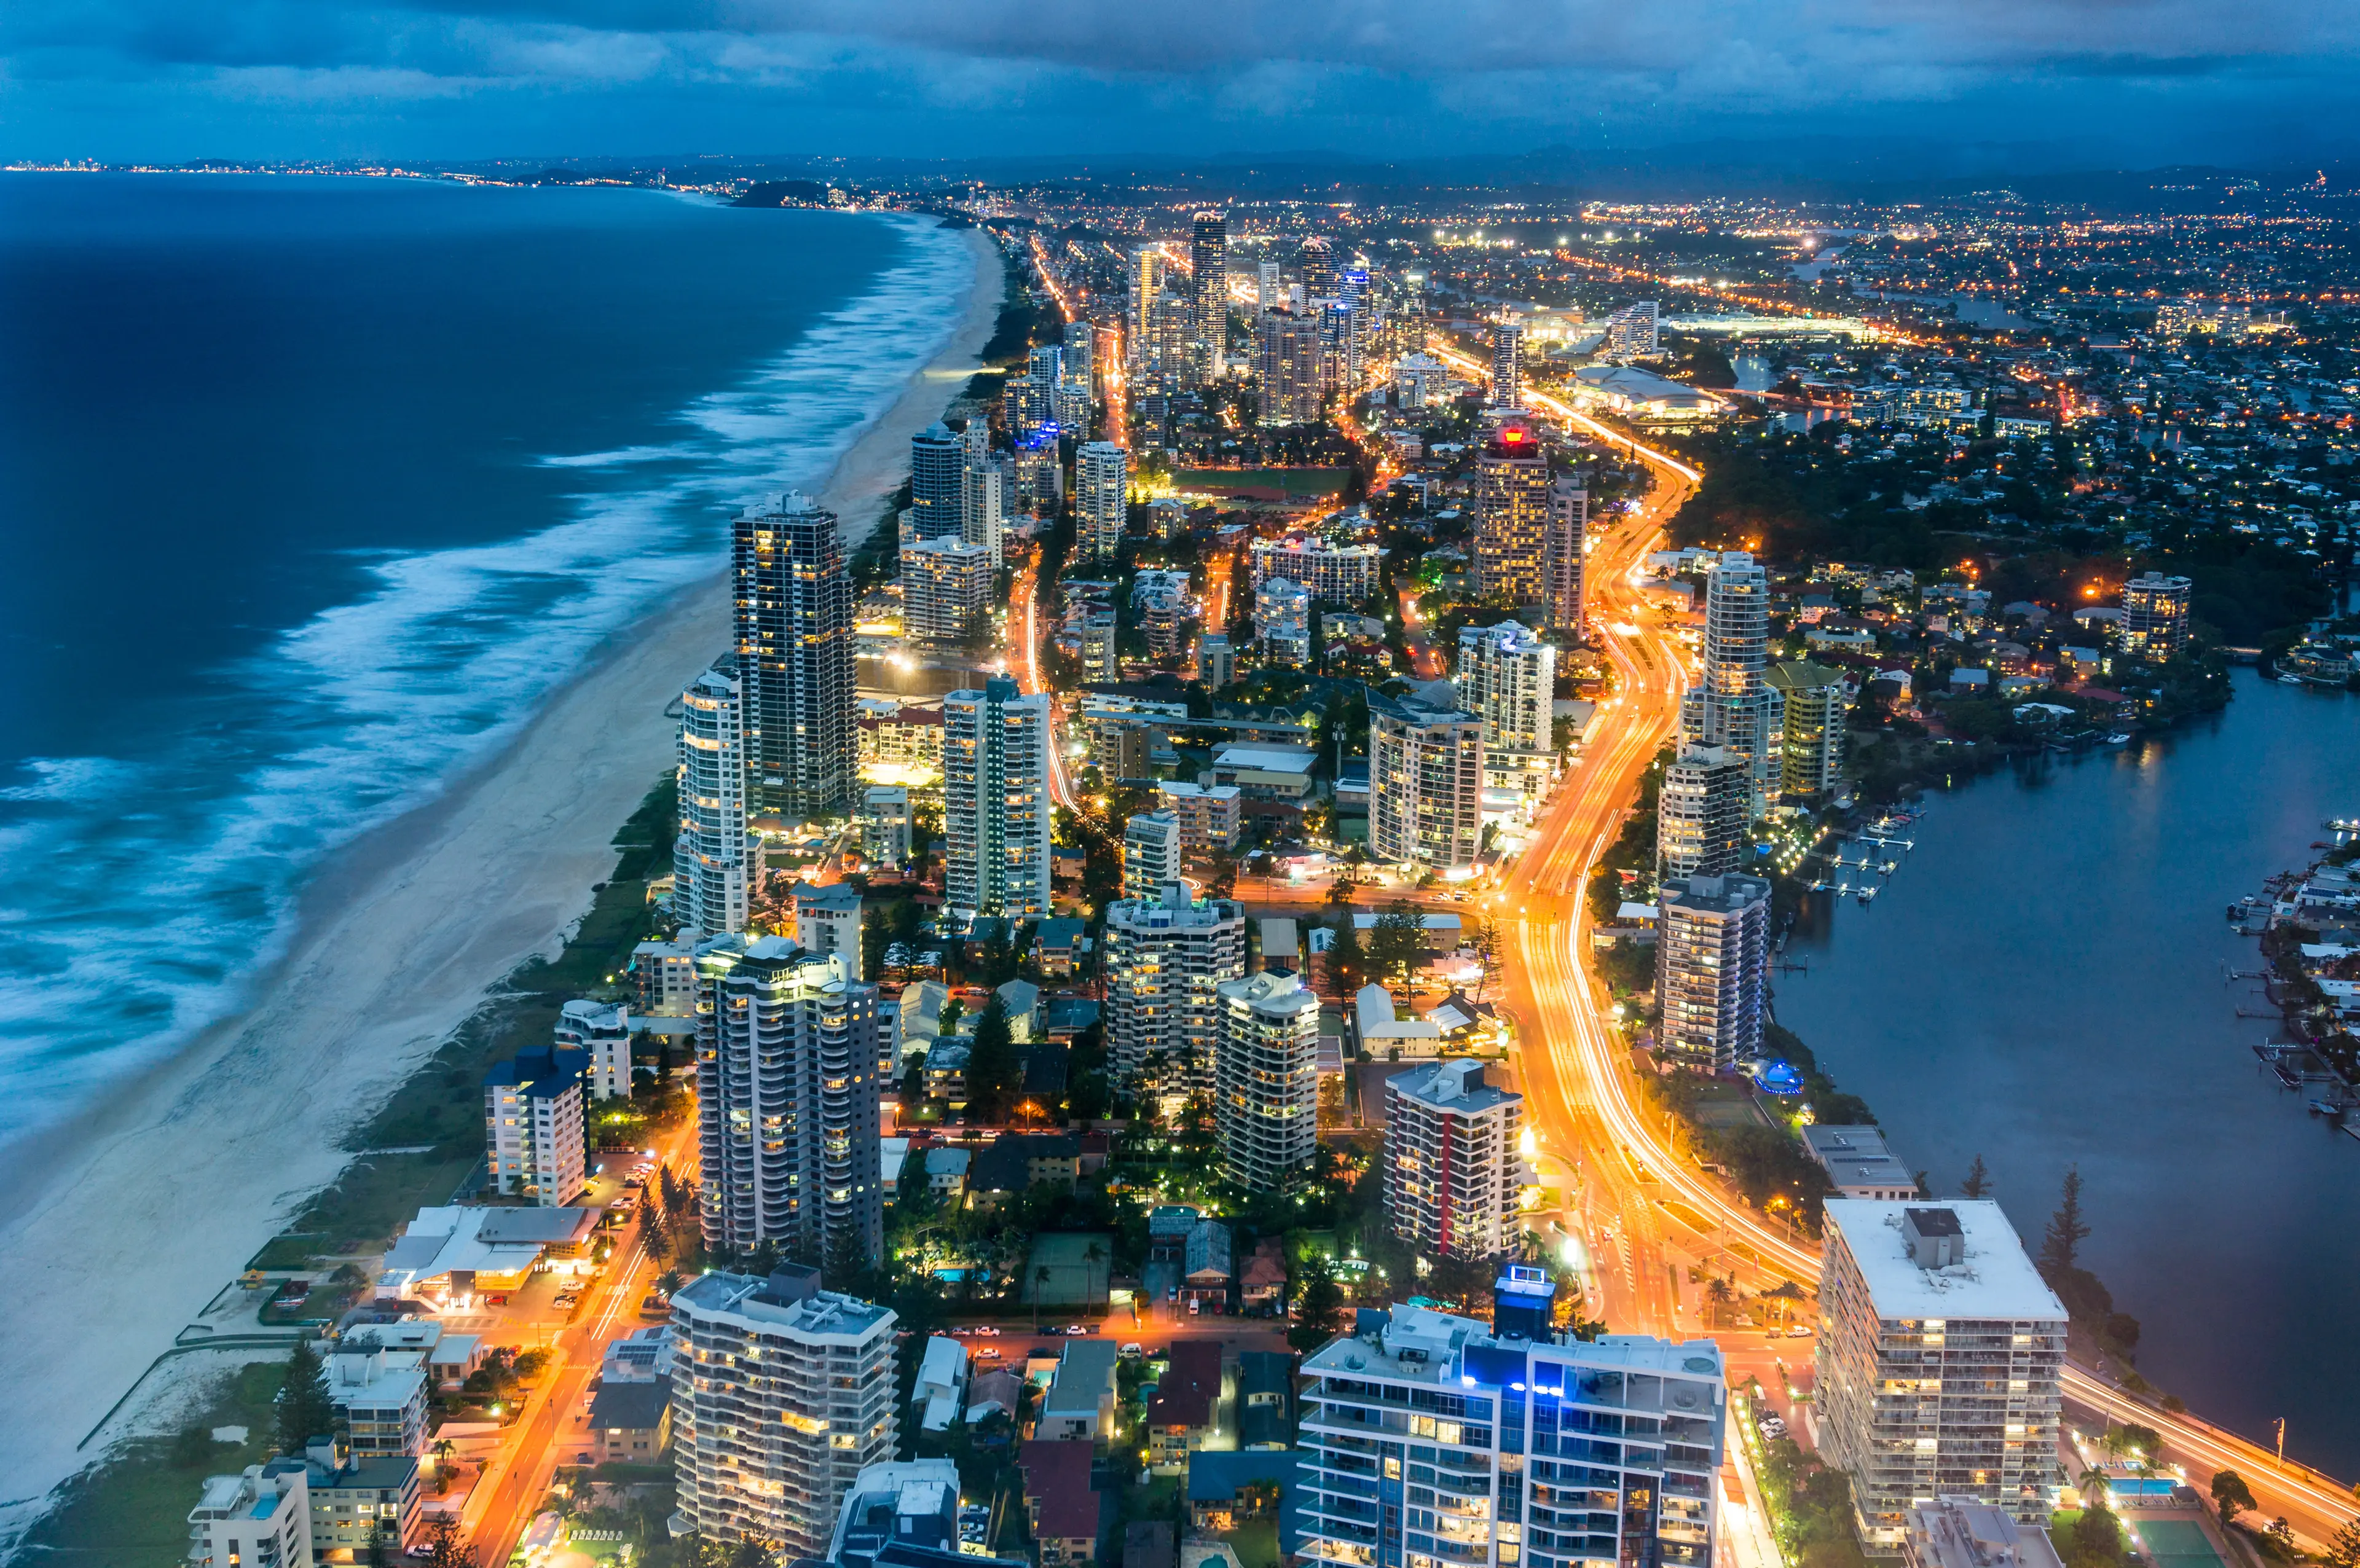 Aerial view of the Surfers Paradise